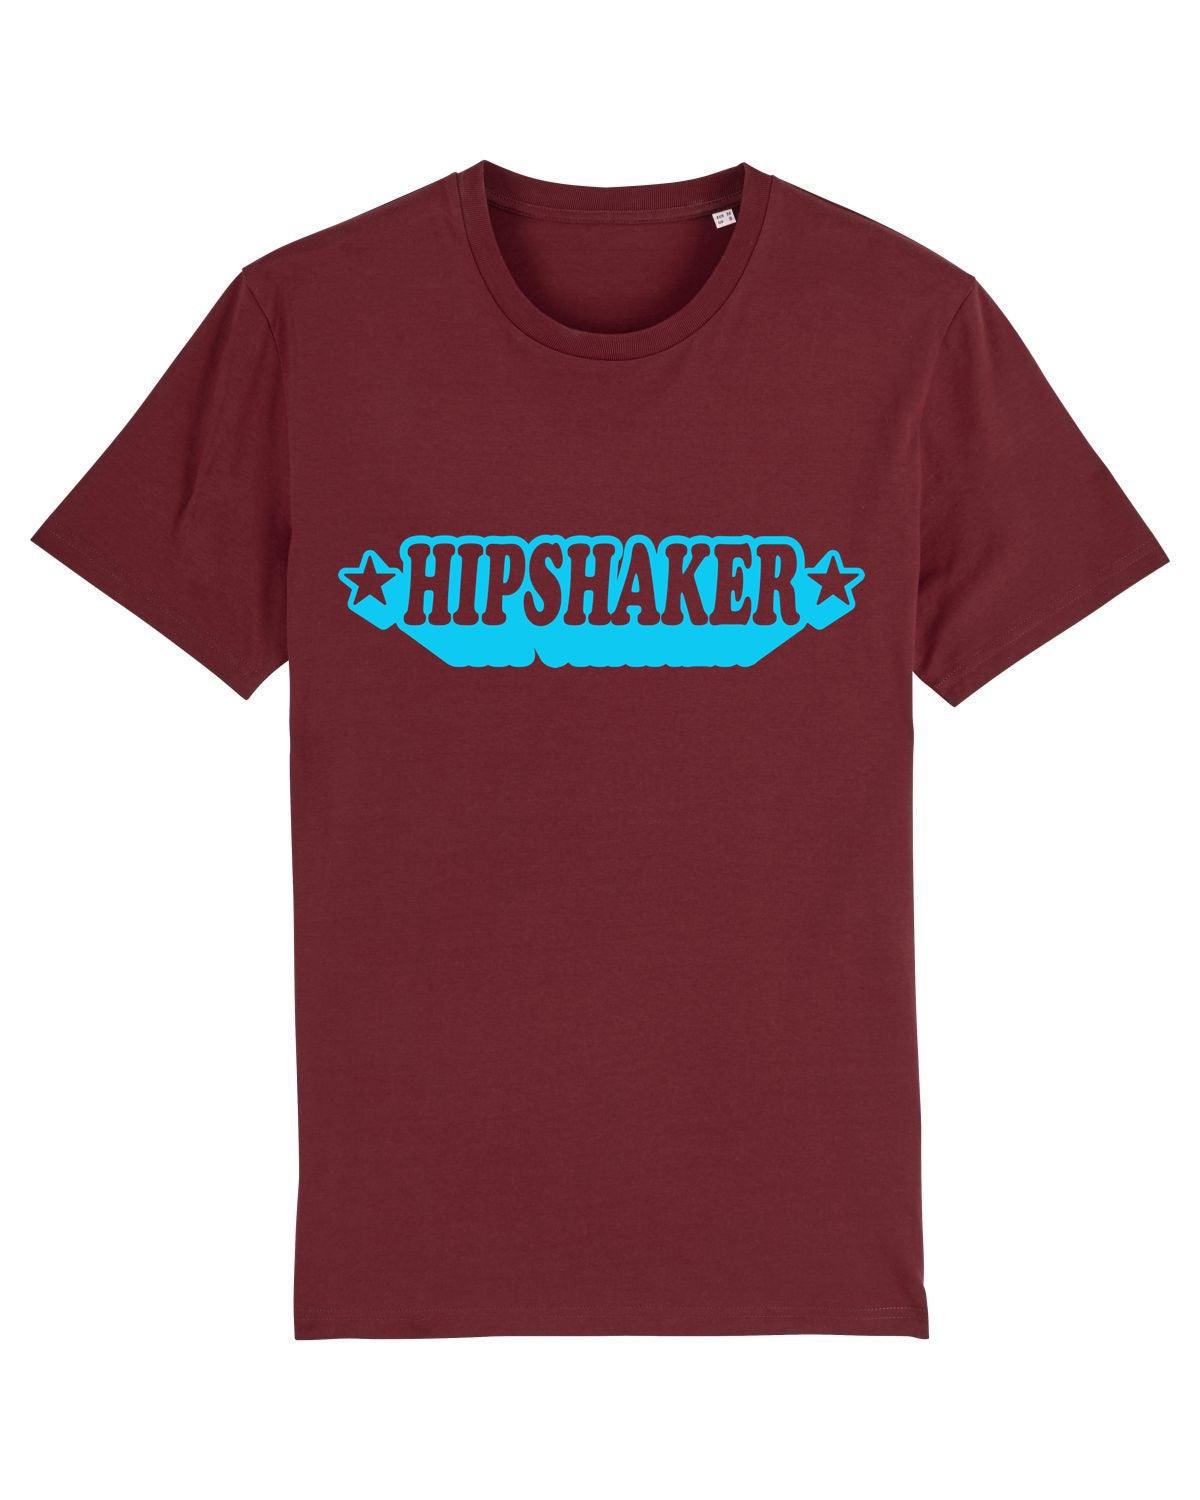 HIPSHAKER STAR: T-Shirt Official Merchandise of Hipshaker (3 Colour Options) - SOUND IS COLOUR